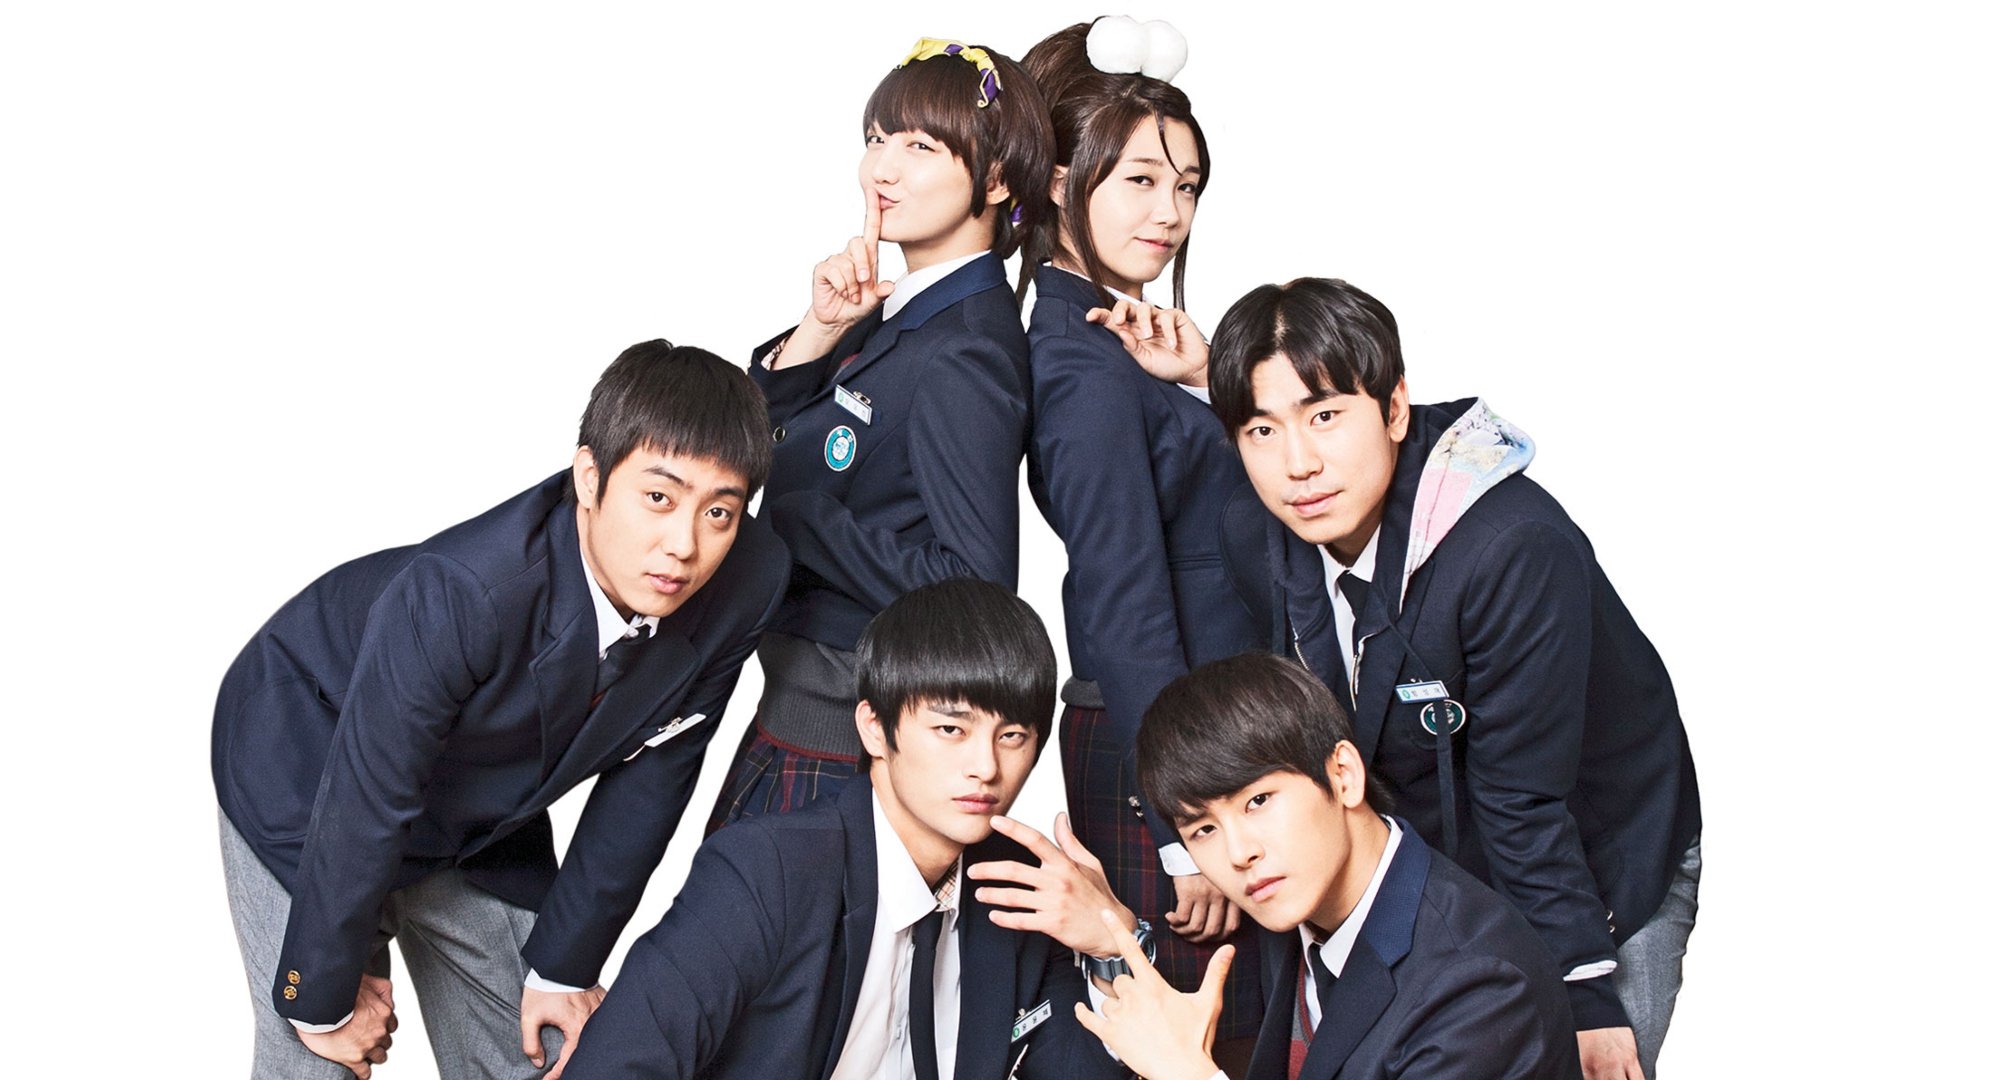 The cast of 'Reply 1997' in 2012.